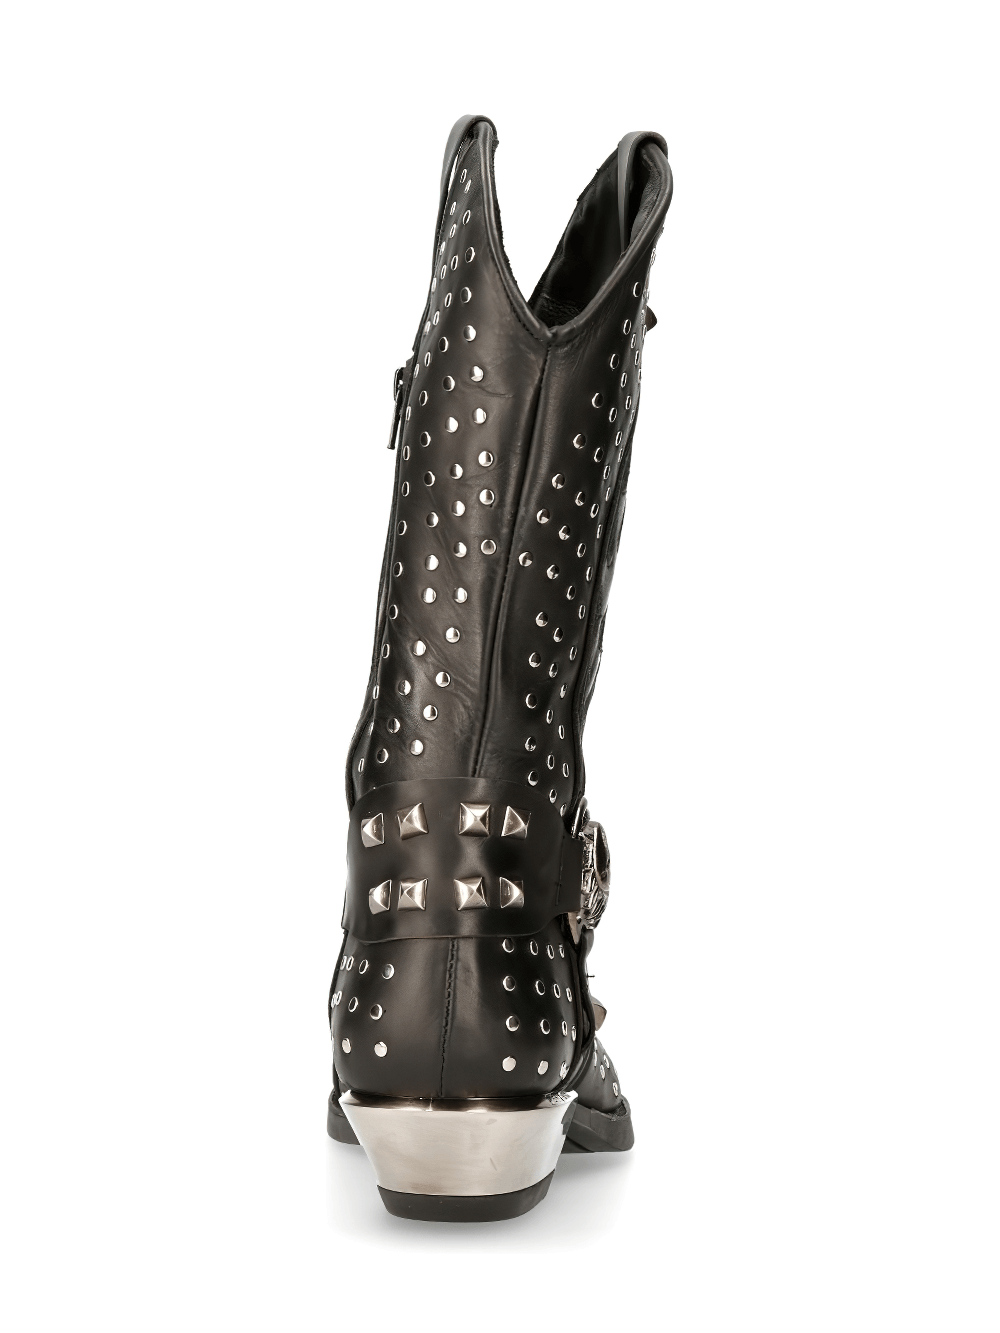 NEW ROCK Silver Studded Leather Western Style Boots